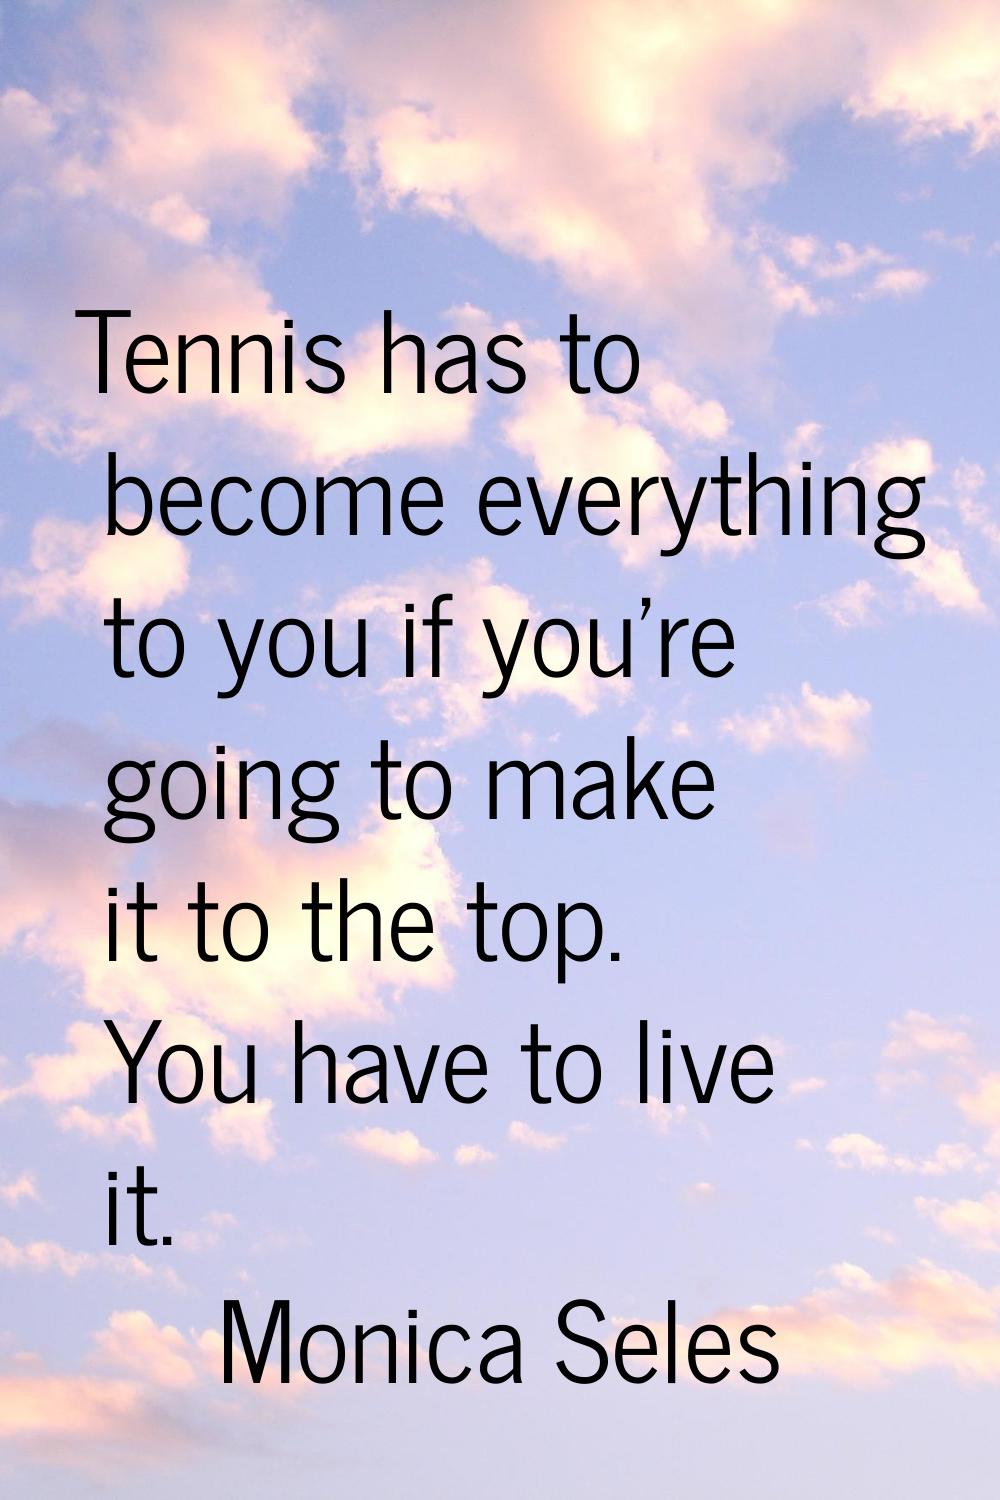 Tennis has to become everything to you if you're going to make it to the top. You have to live it.